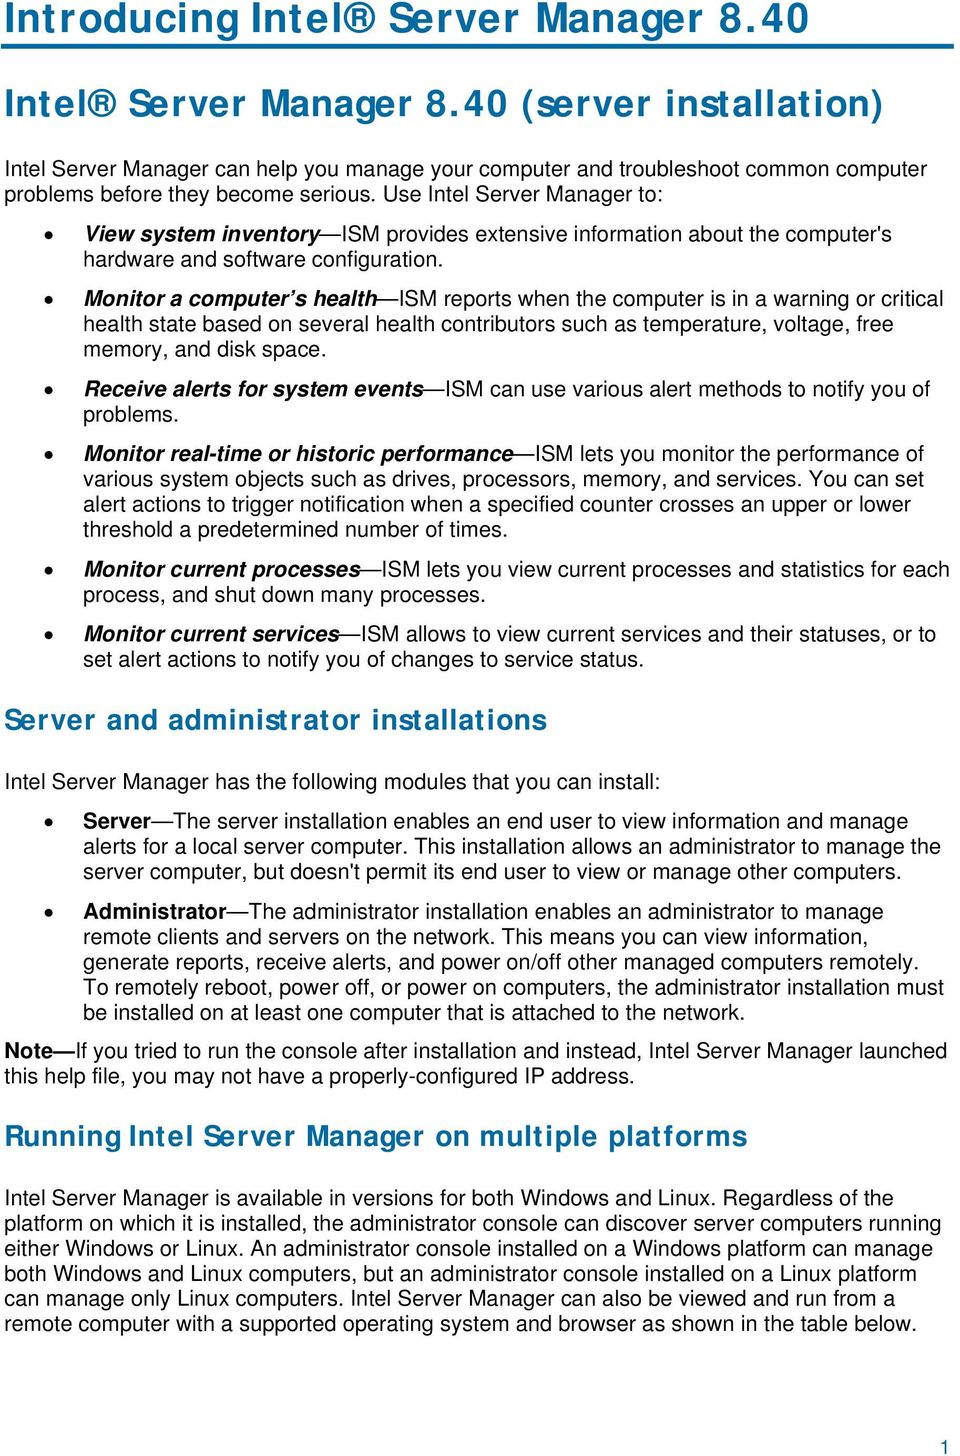 Use Intel Server Manager to: View system inventory ISM provides extensive information about the computer's hardware and software configuration.